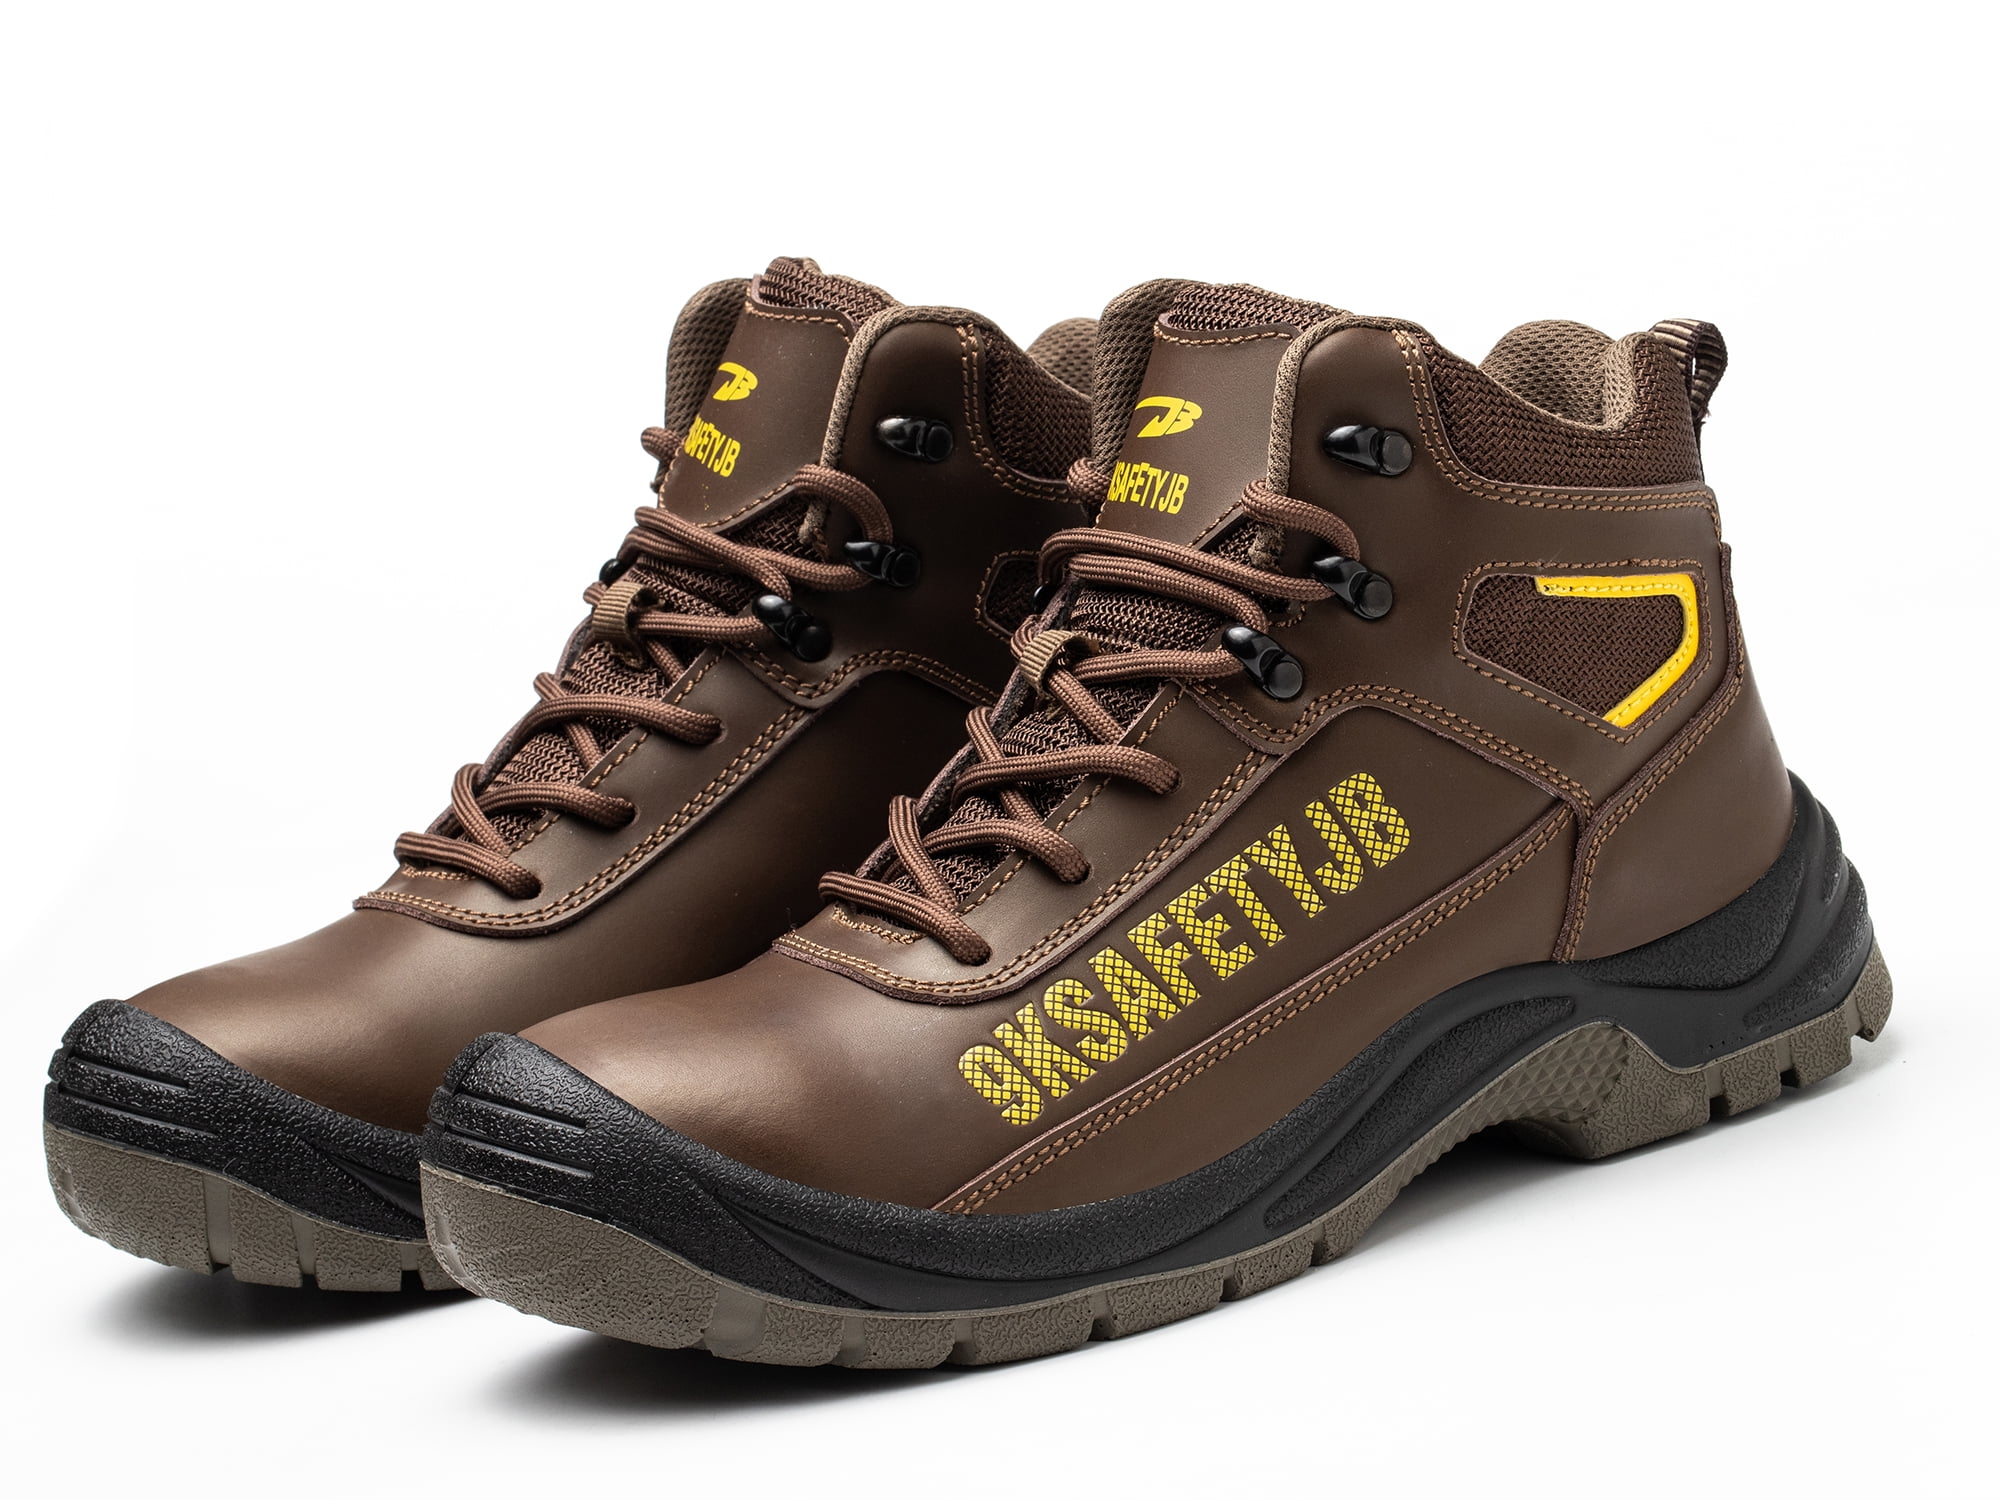 Indestructible Military Shoes Men's Steel Toe Cap Anti puture Work Safety Shoes 